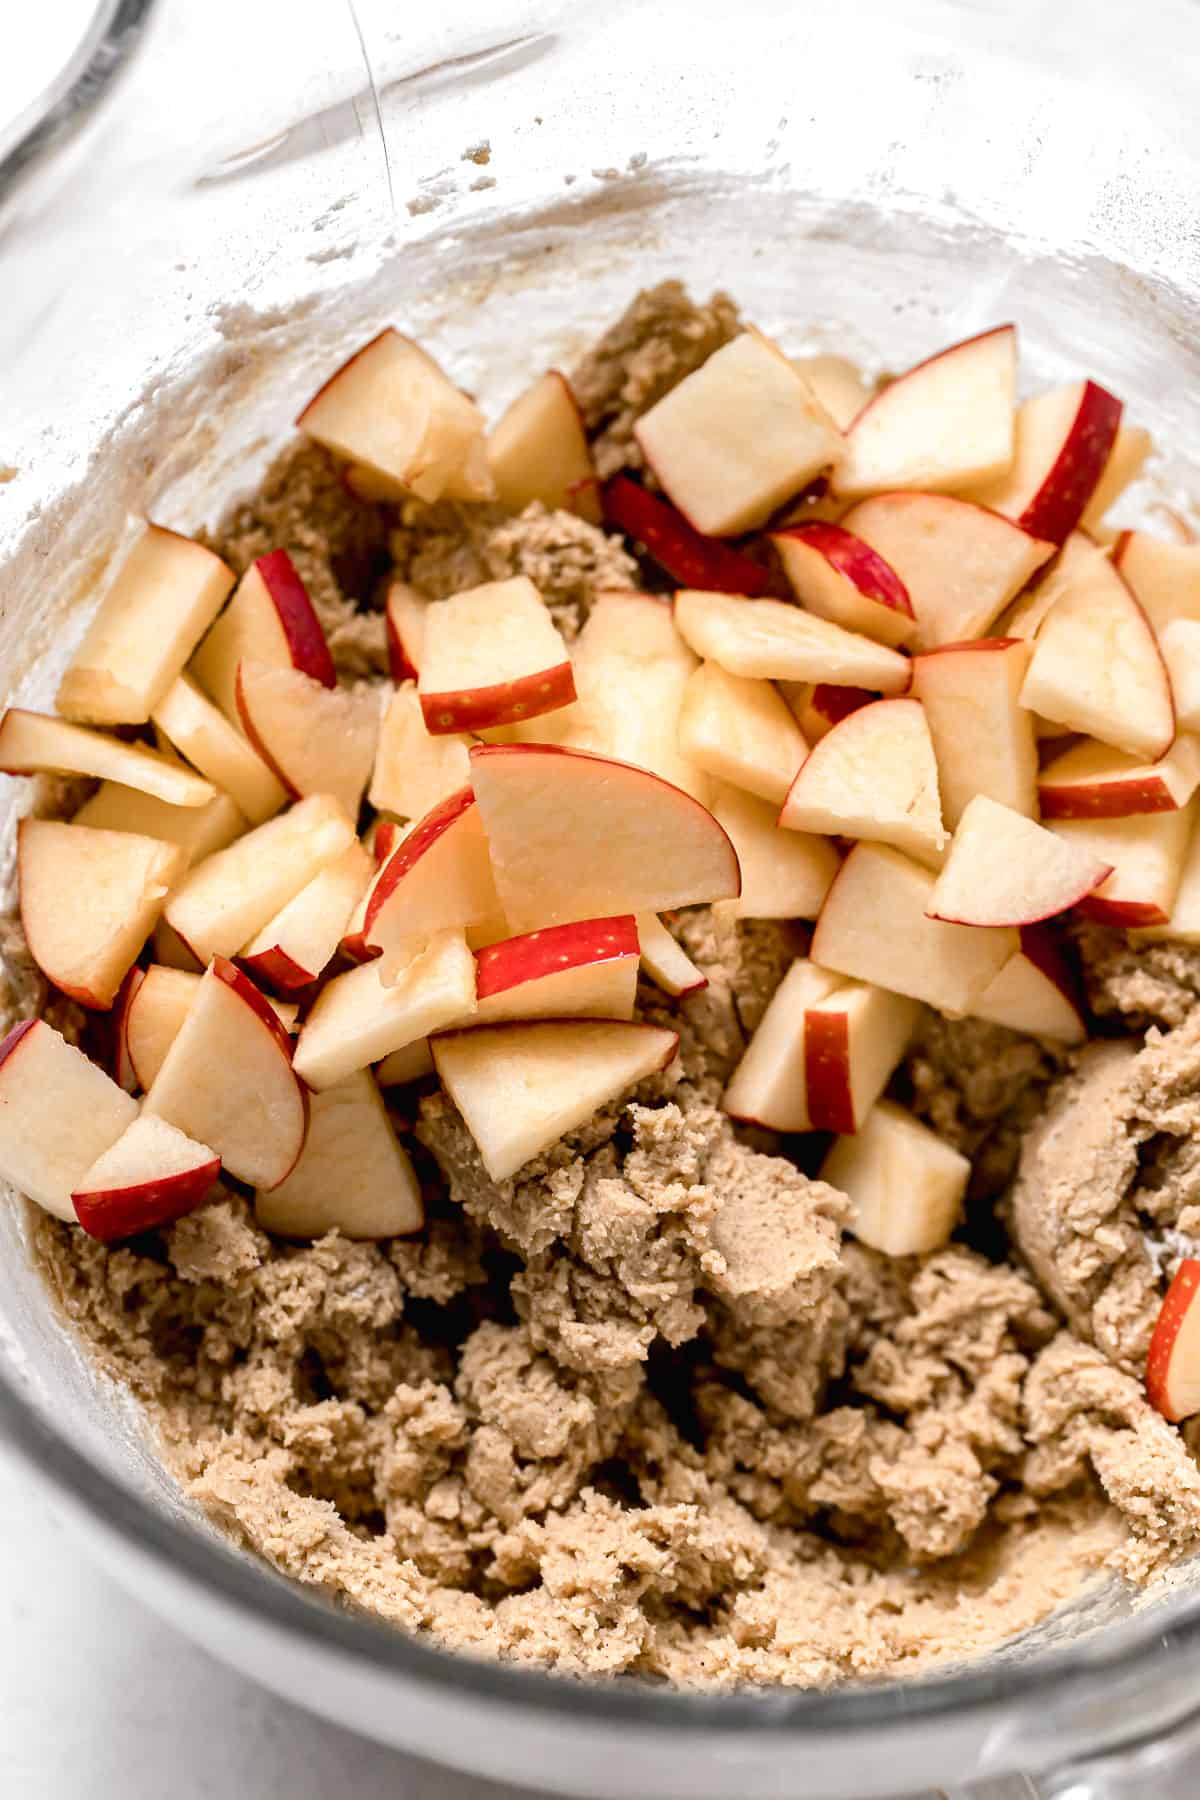 apple pieces added to cookie dough.